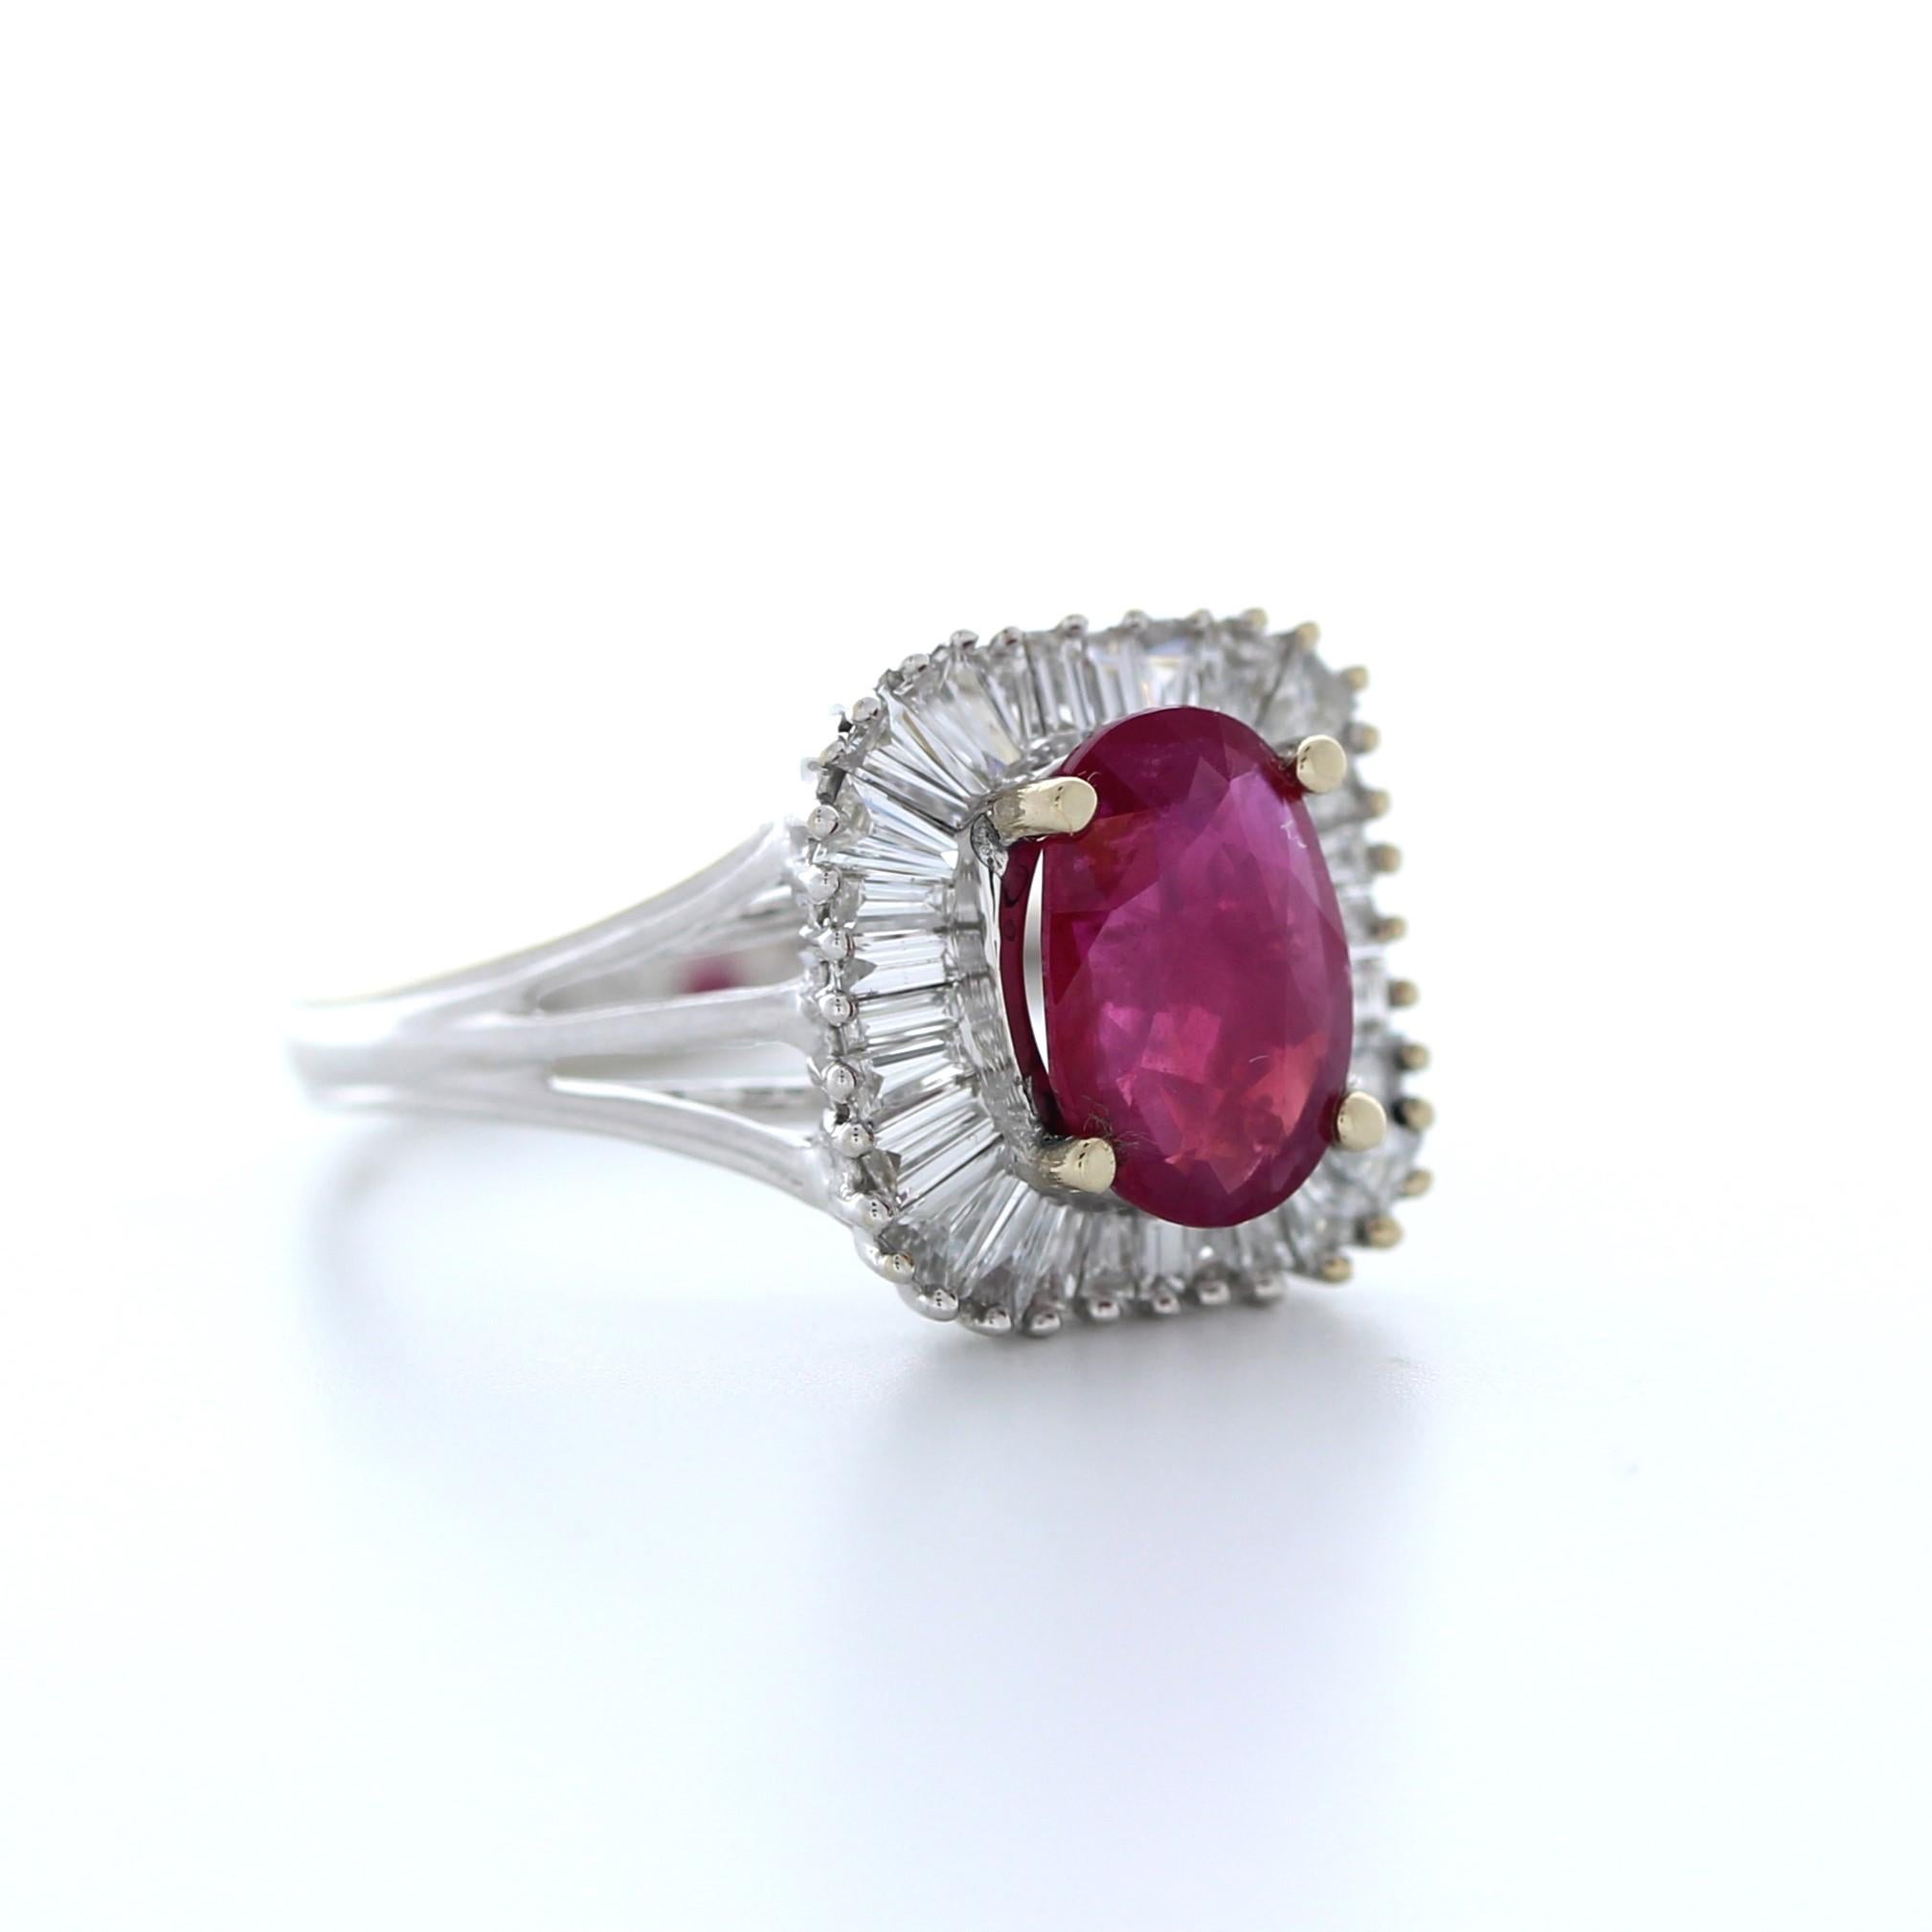 Make a bold statement with this stunning 2.02 carat weight oval shape ruby fashion ring. The vivid red hue of the ruby is truly captivating, and the oval cut allows it to reflect light beautifully. The ruby is set in luxurious 18K white gold and is